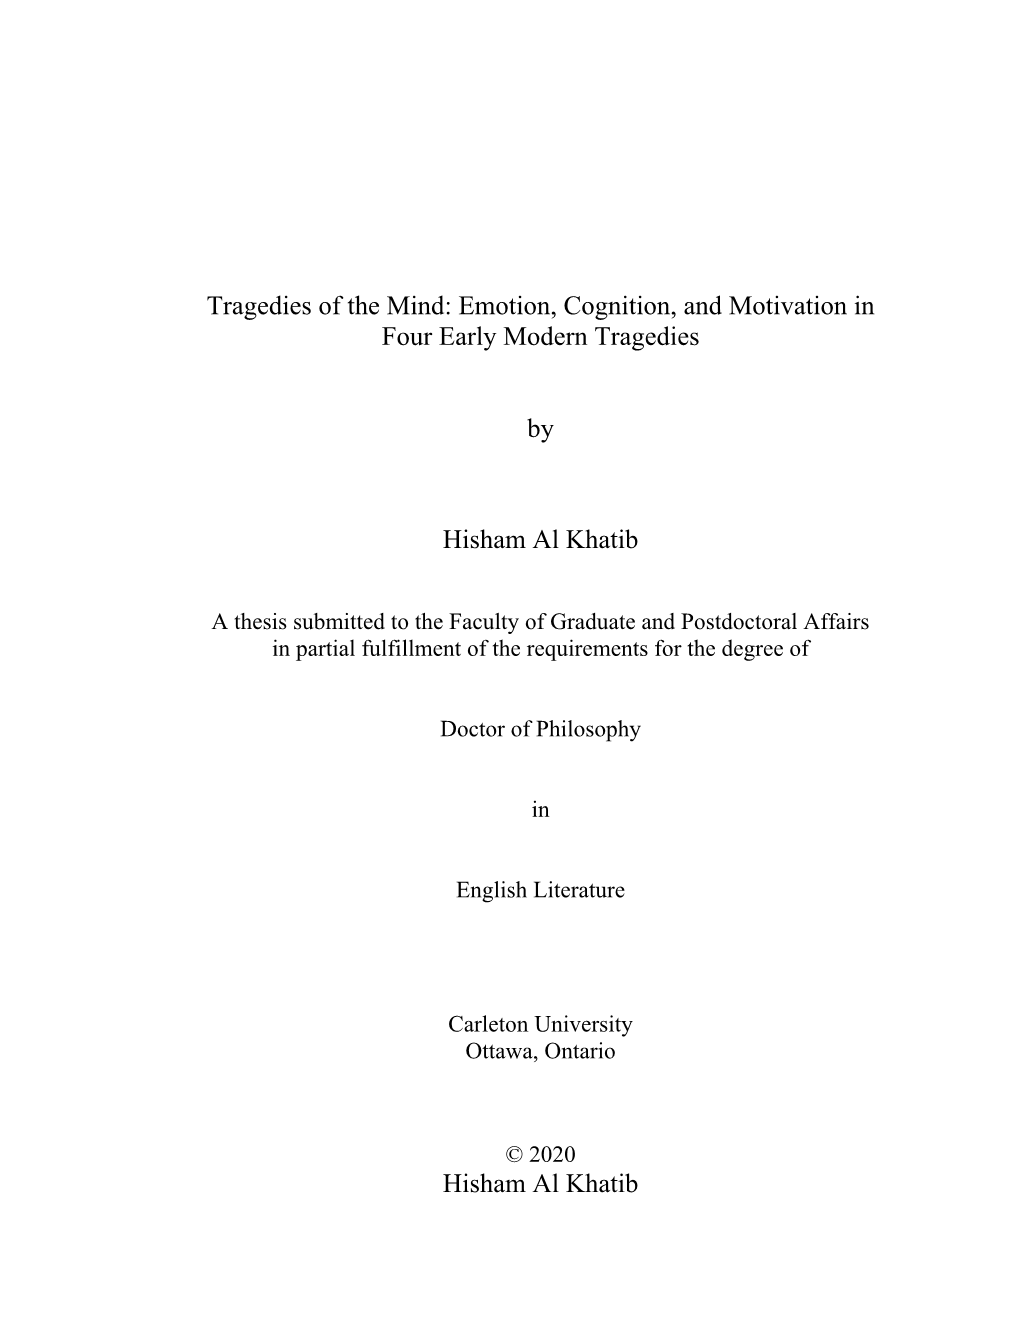 Tragedies of the Mind: Emotion, Cognition, and Motivation in Four Early Modern Tragedies